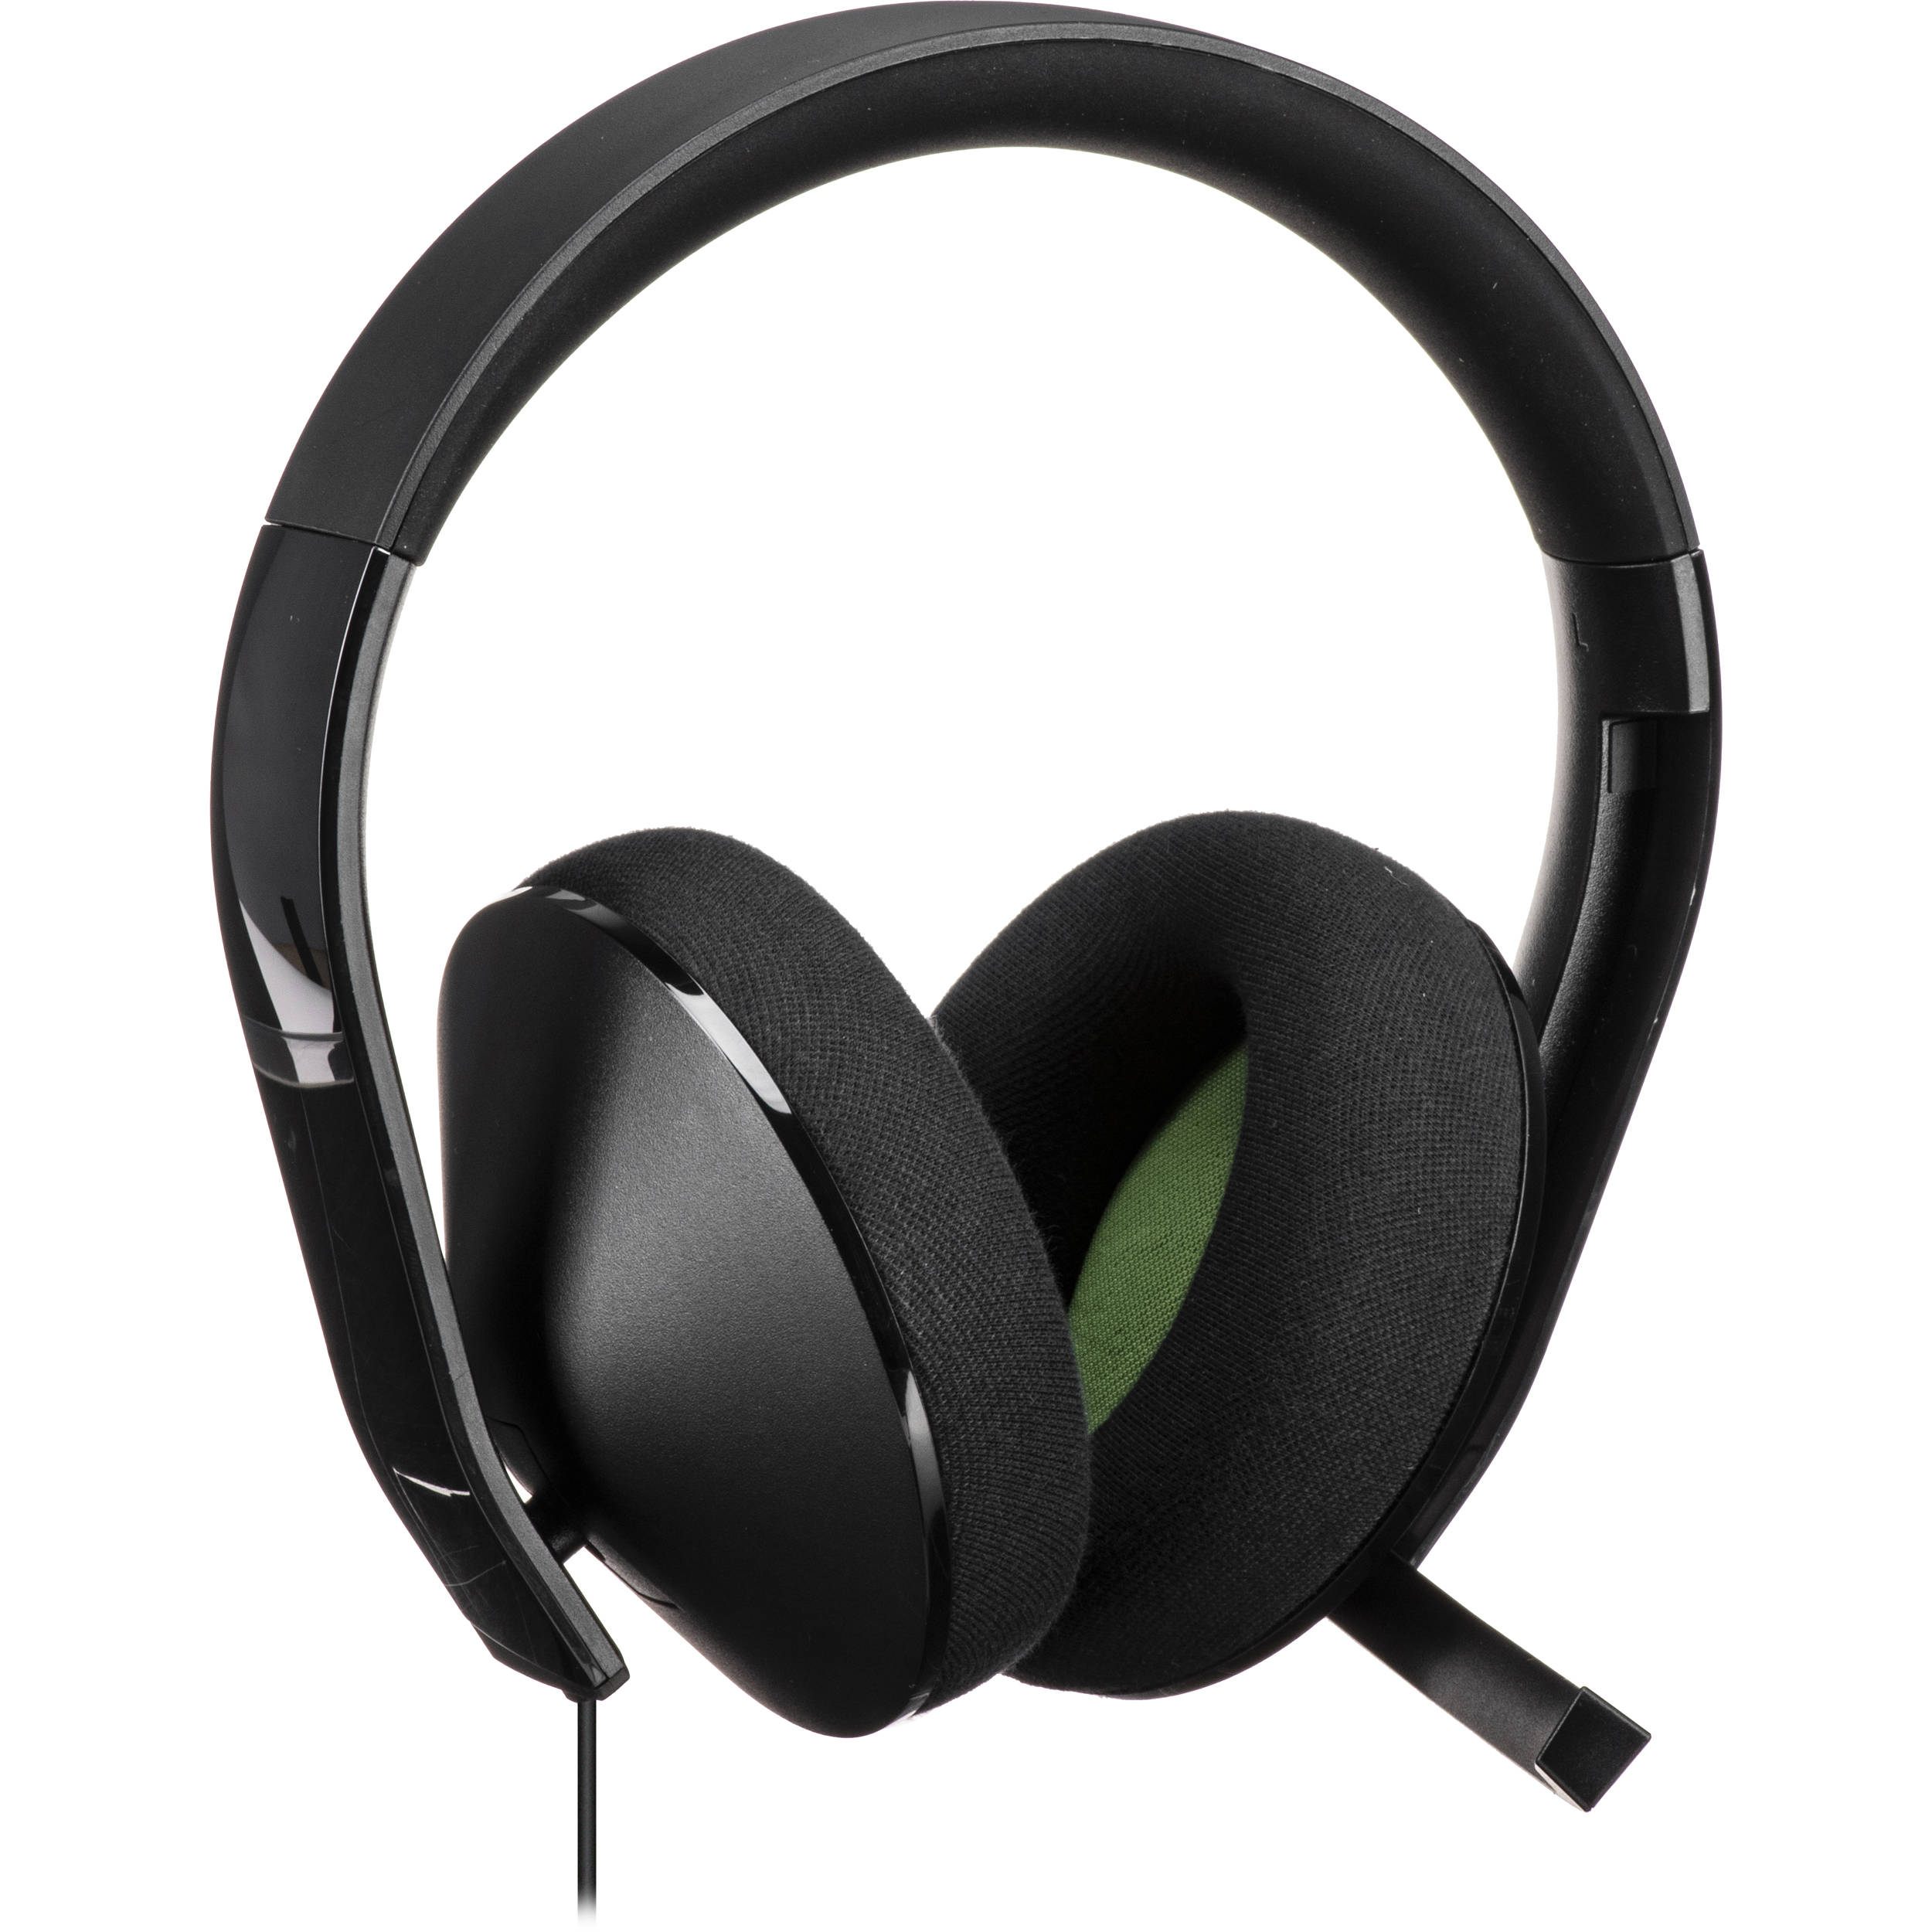 good cheap headset for xbox one